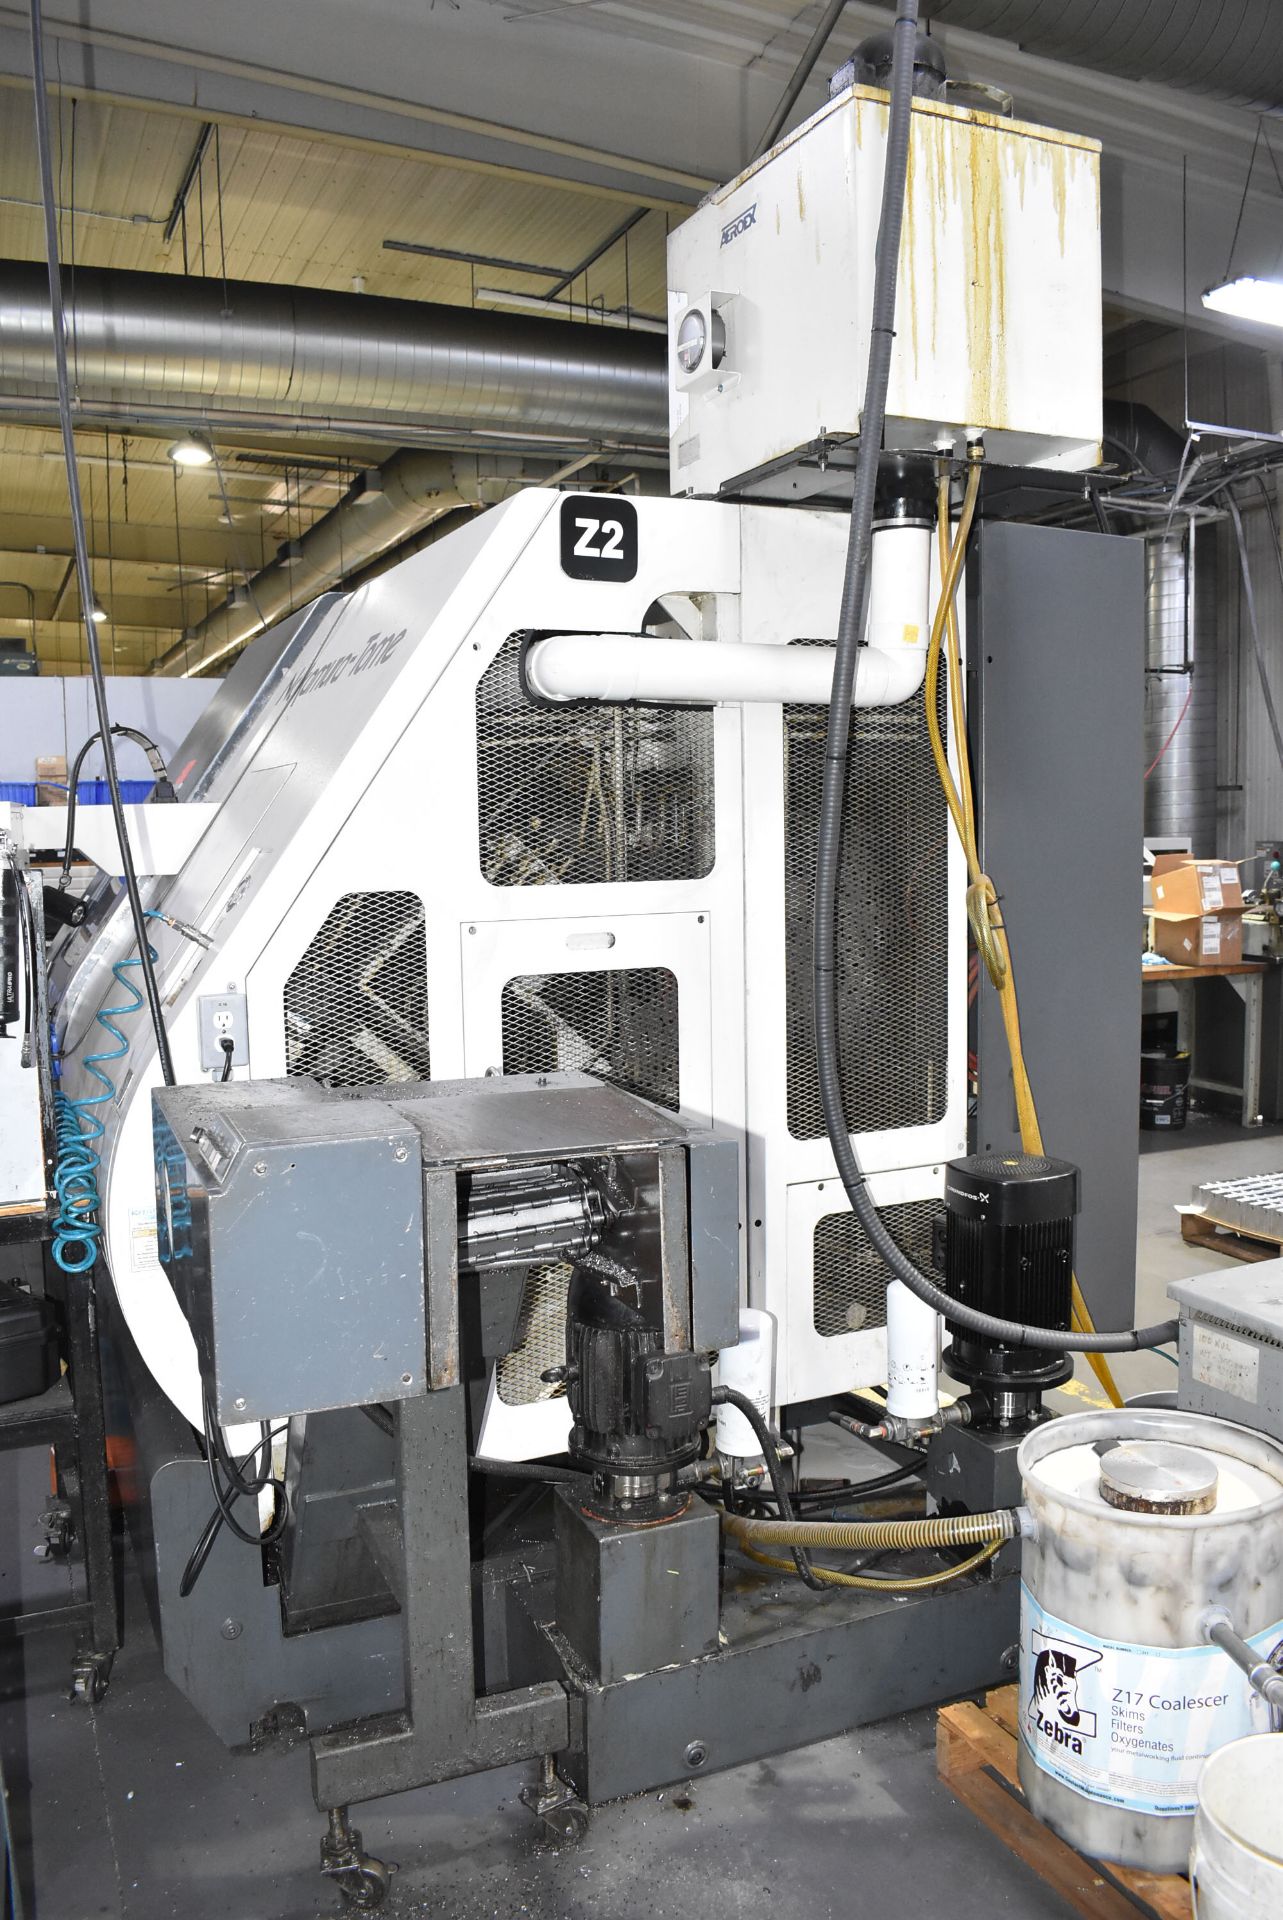 NAKAMURA-TOME (2007) WT-300 MMYS 7-AXIS OPPOSED SPINDLE AND TWIN TURRET CNC MULTI-TASKING CENTER - Image 14 of 15